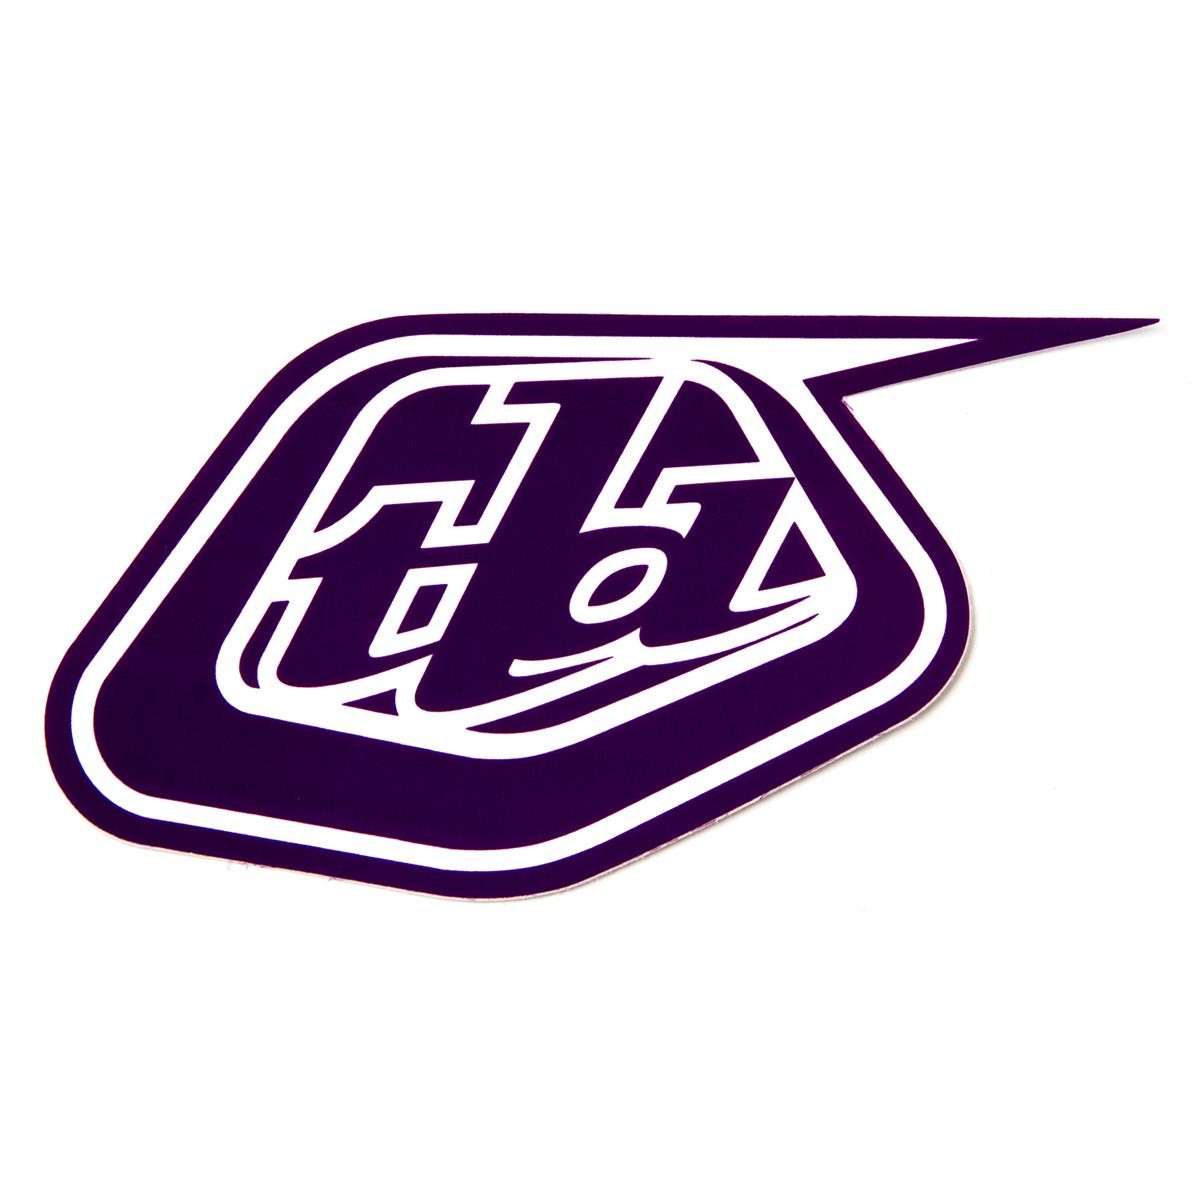 Troy Lee Designs Sticker Shield Violet - 4 inches